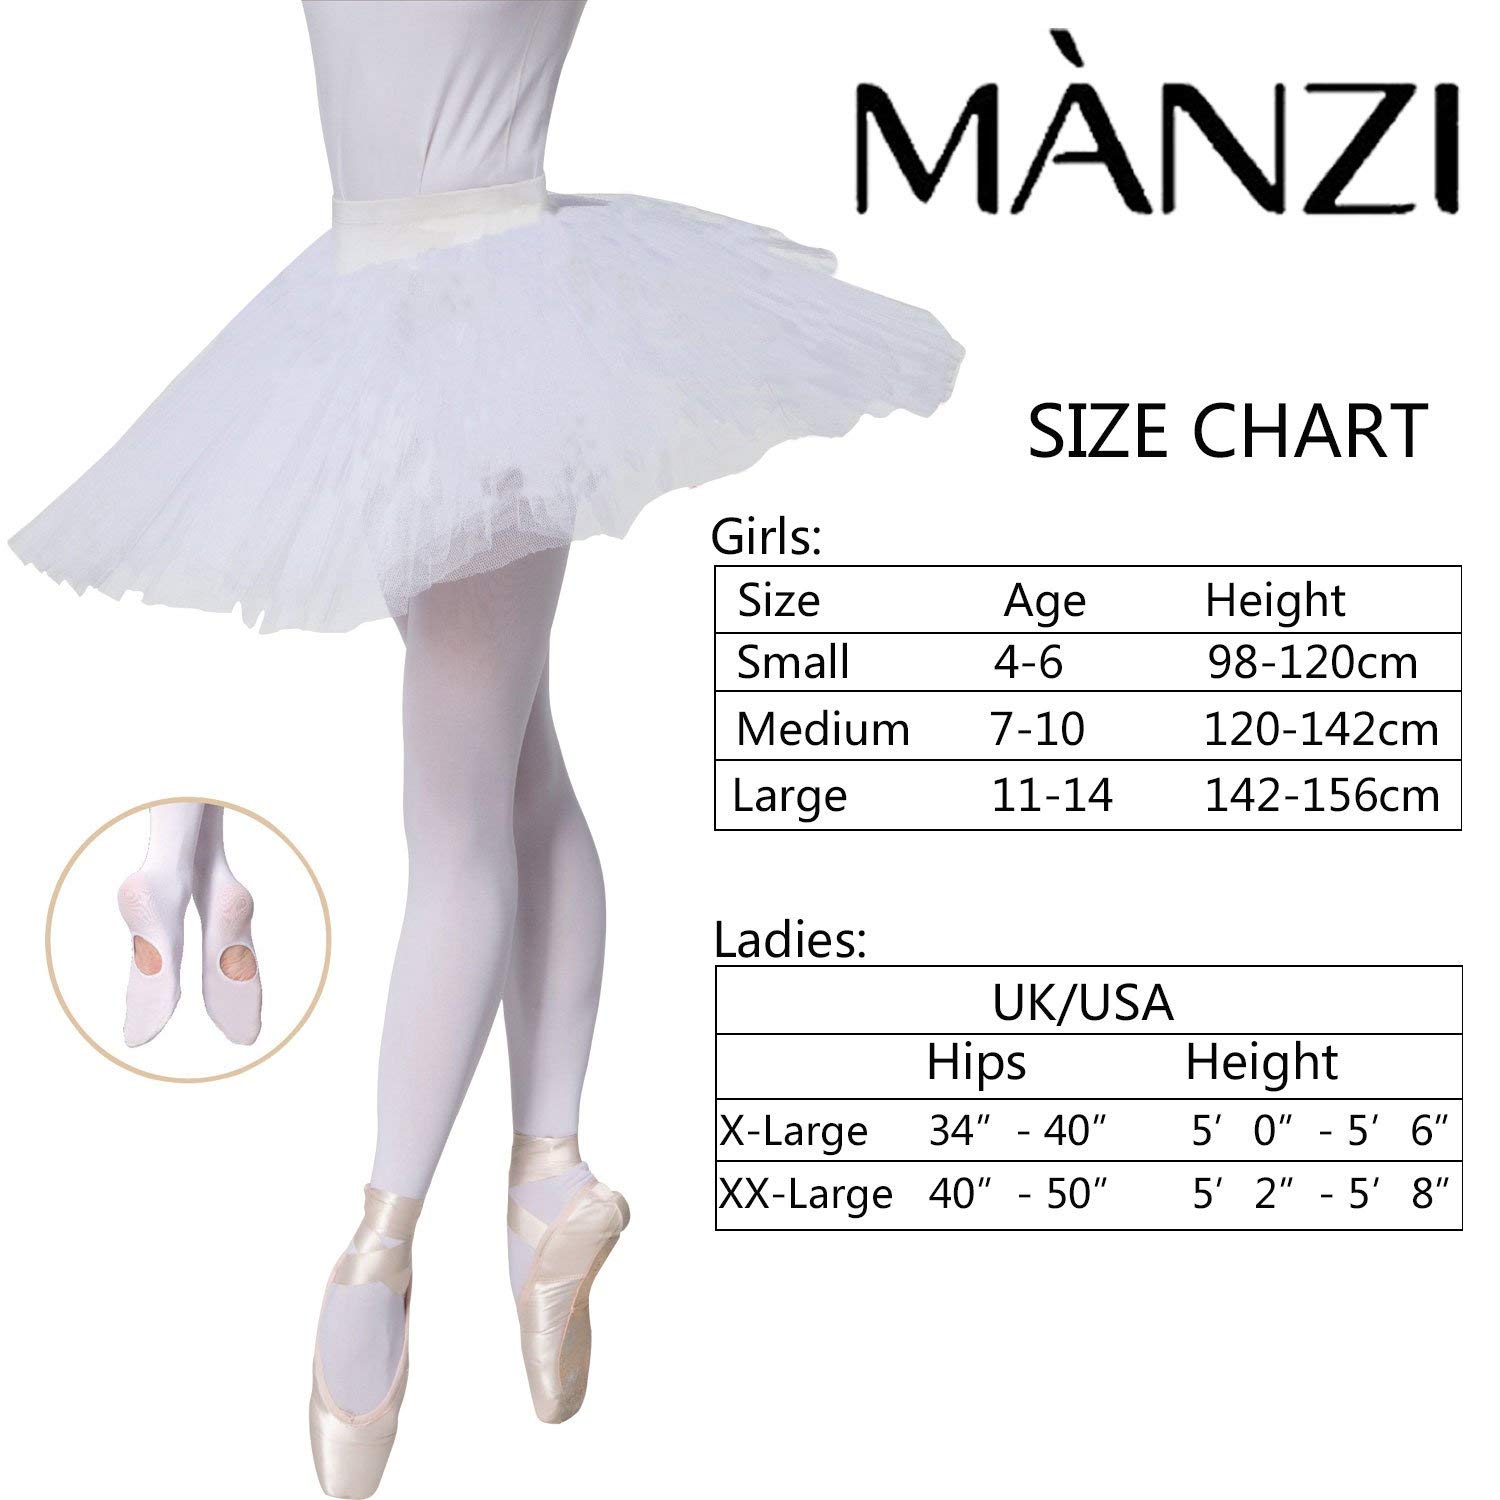 MANZI Womens Girls Solid Color Comfortable Convertible Ballet Tights 1-3 Pairs Pack